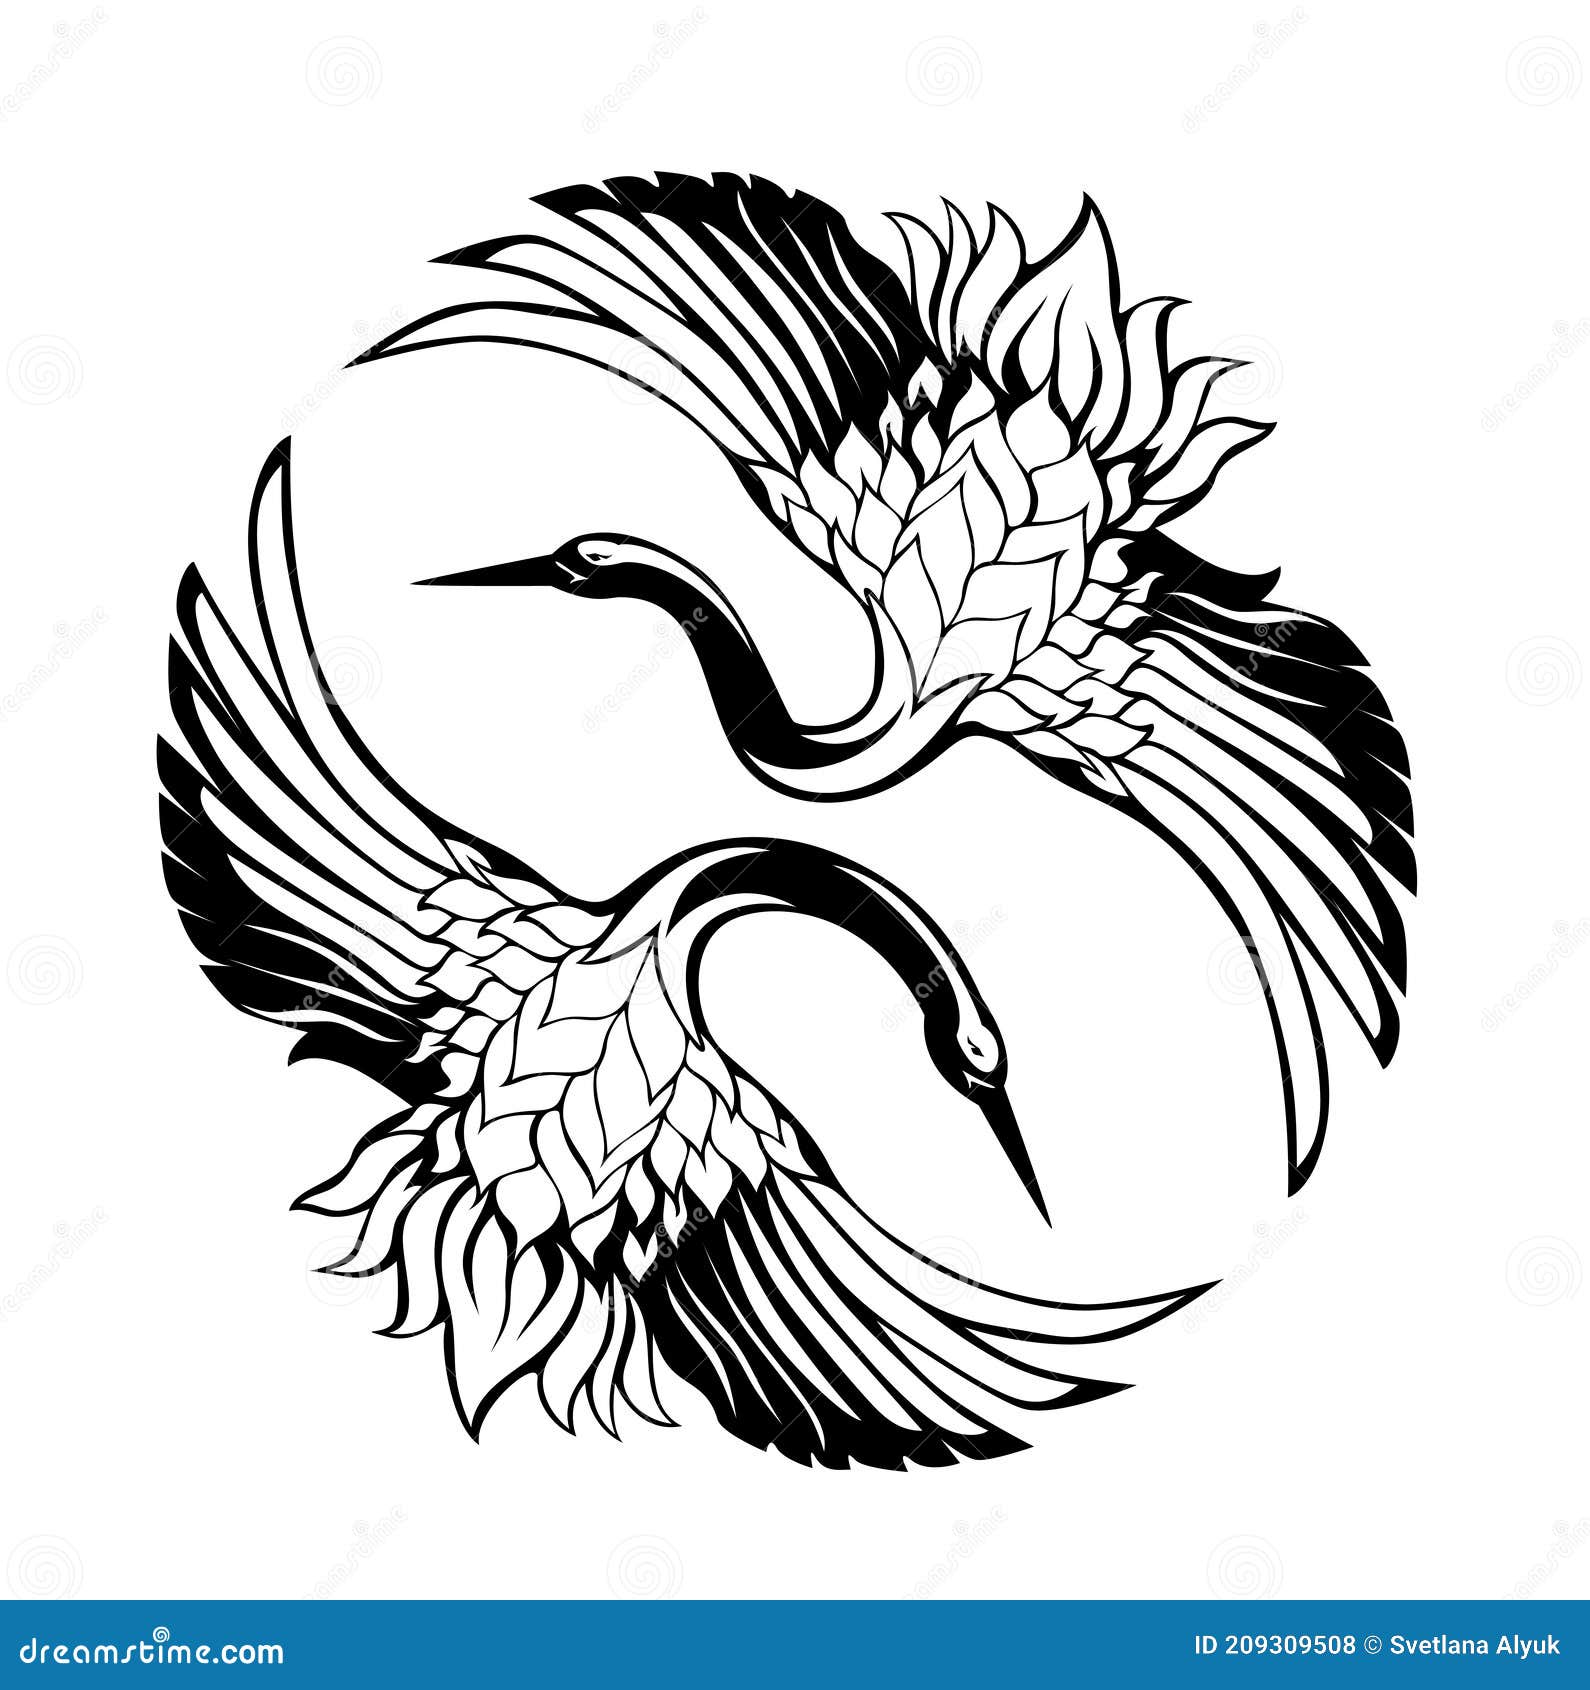 Two Japanese Crane Birds With Spread Wings Black And White Vector